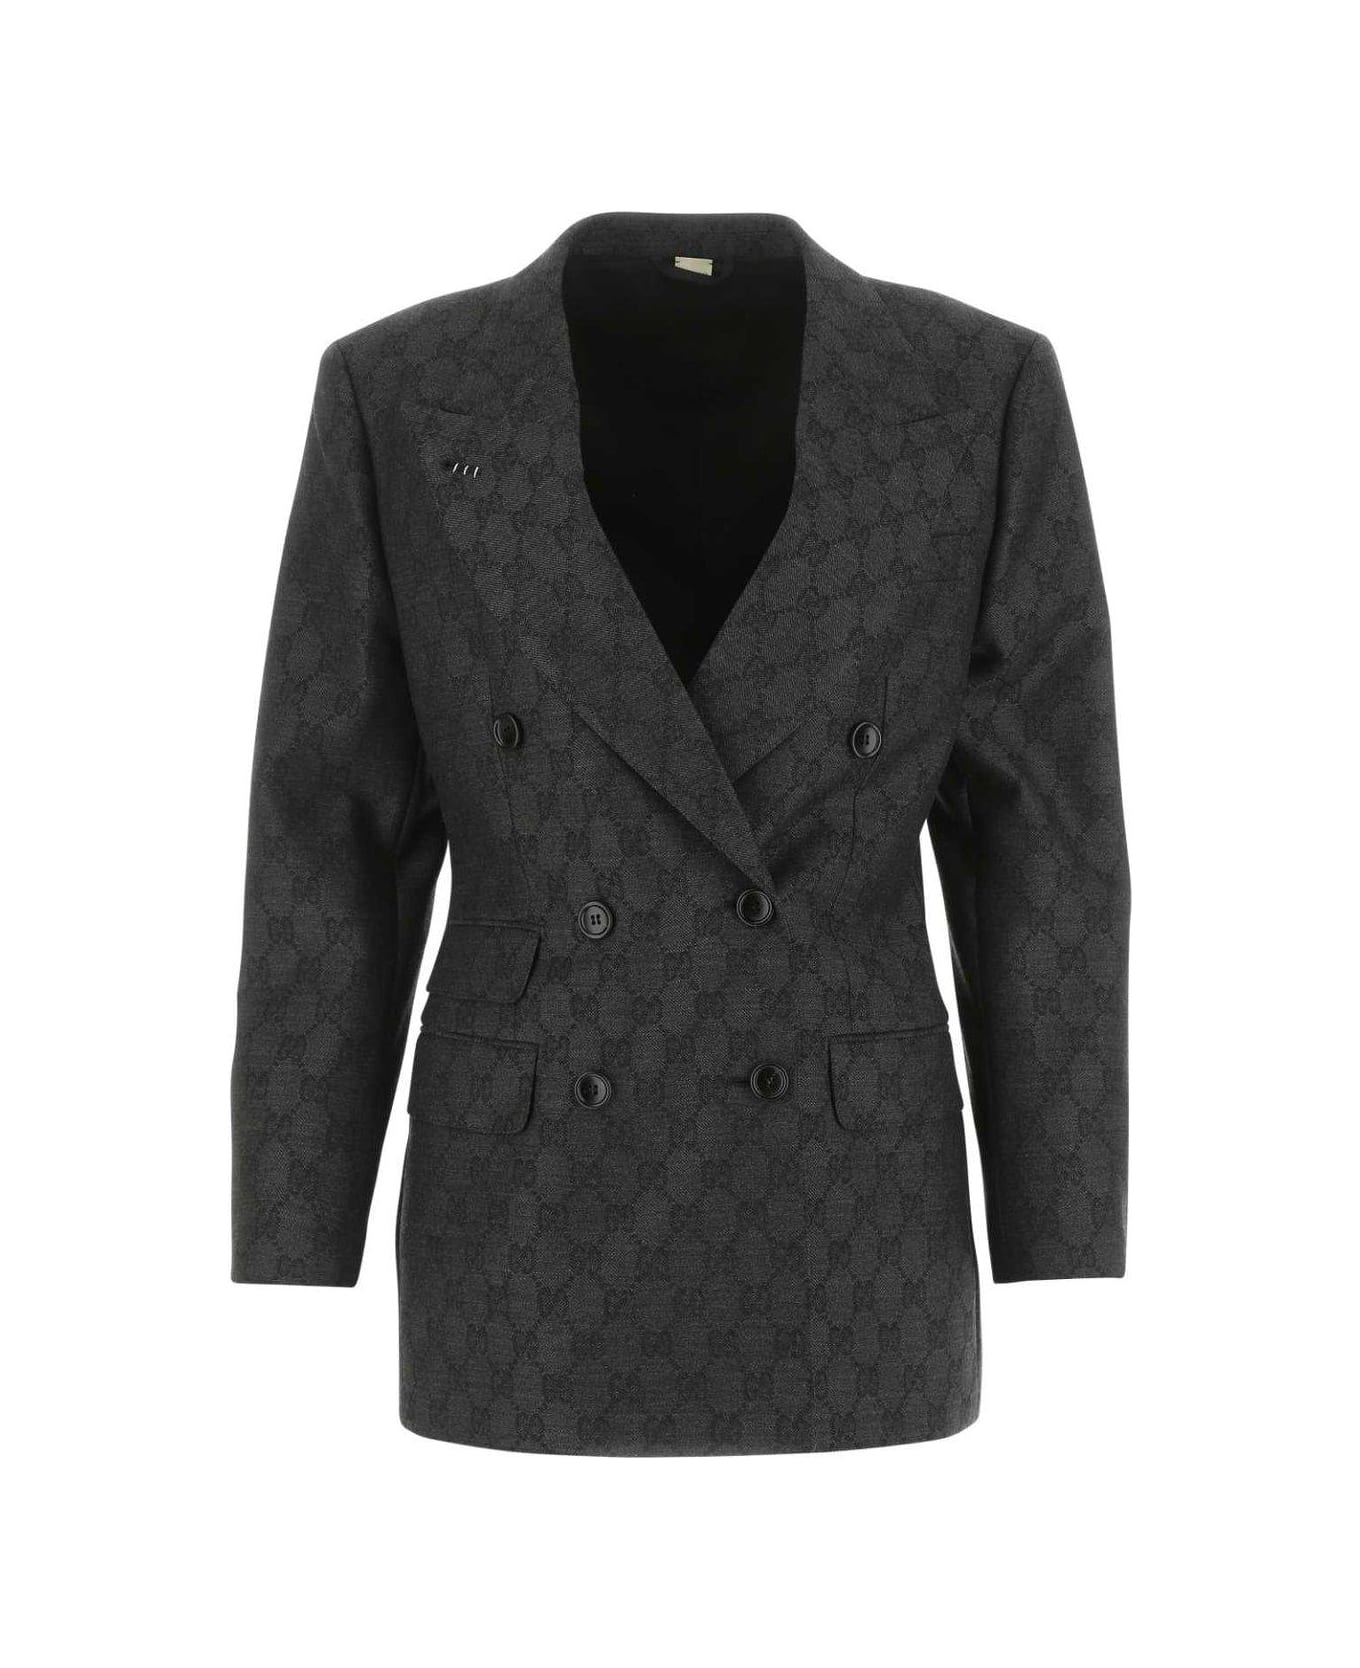 Gucci Gg Jacquard Double-breasted Jacket - Grey コート